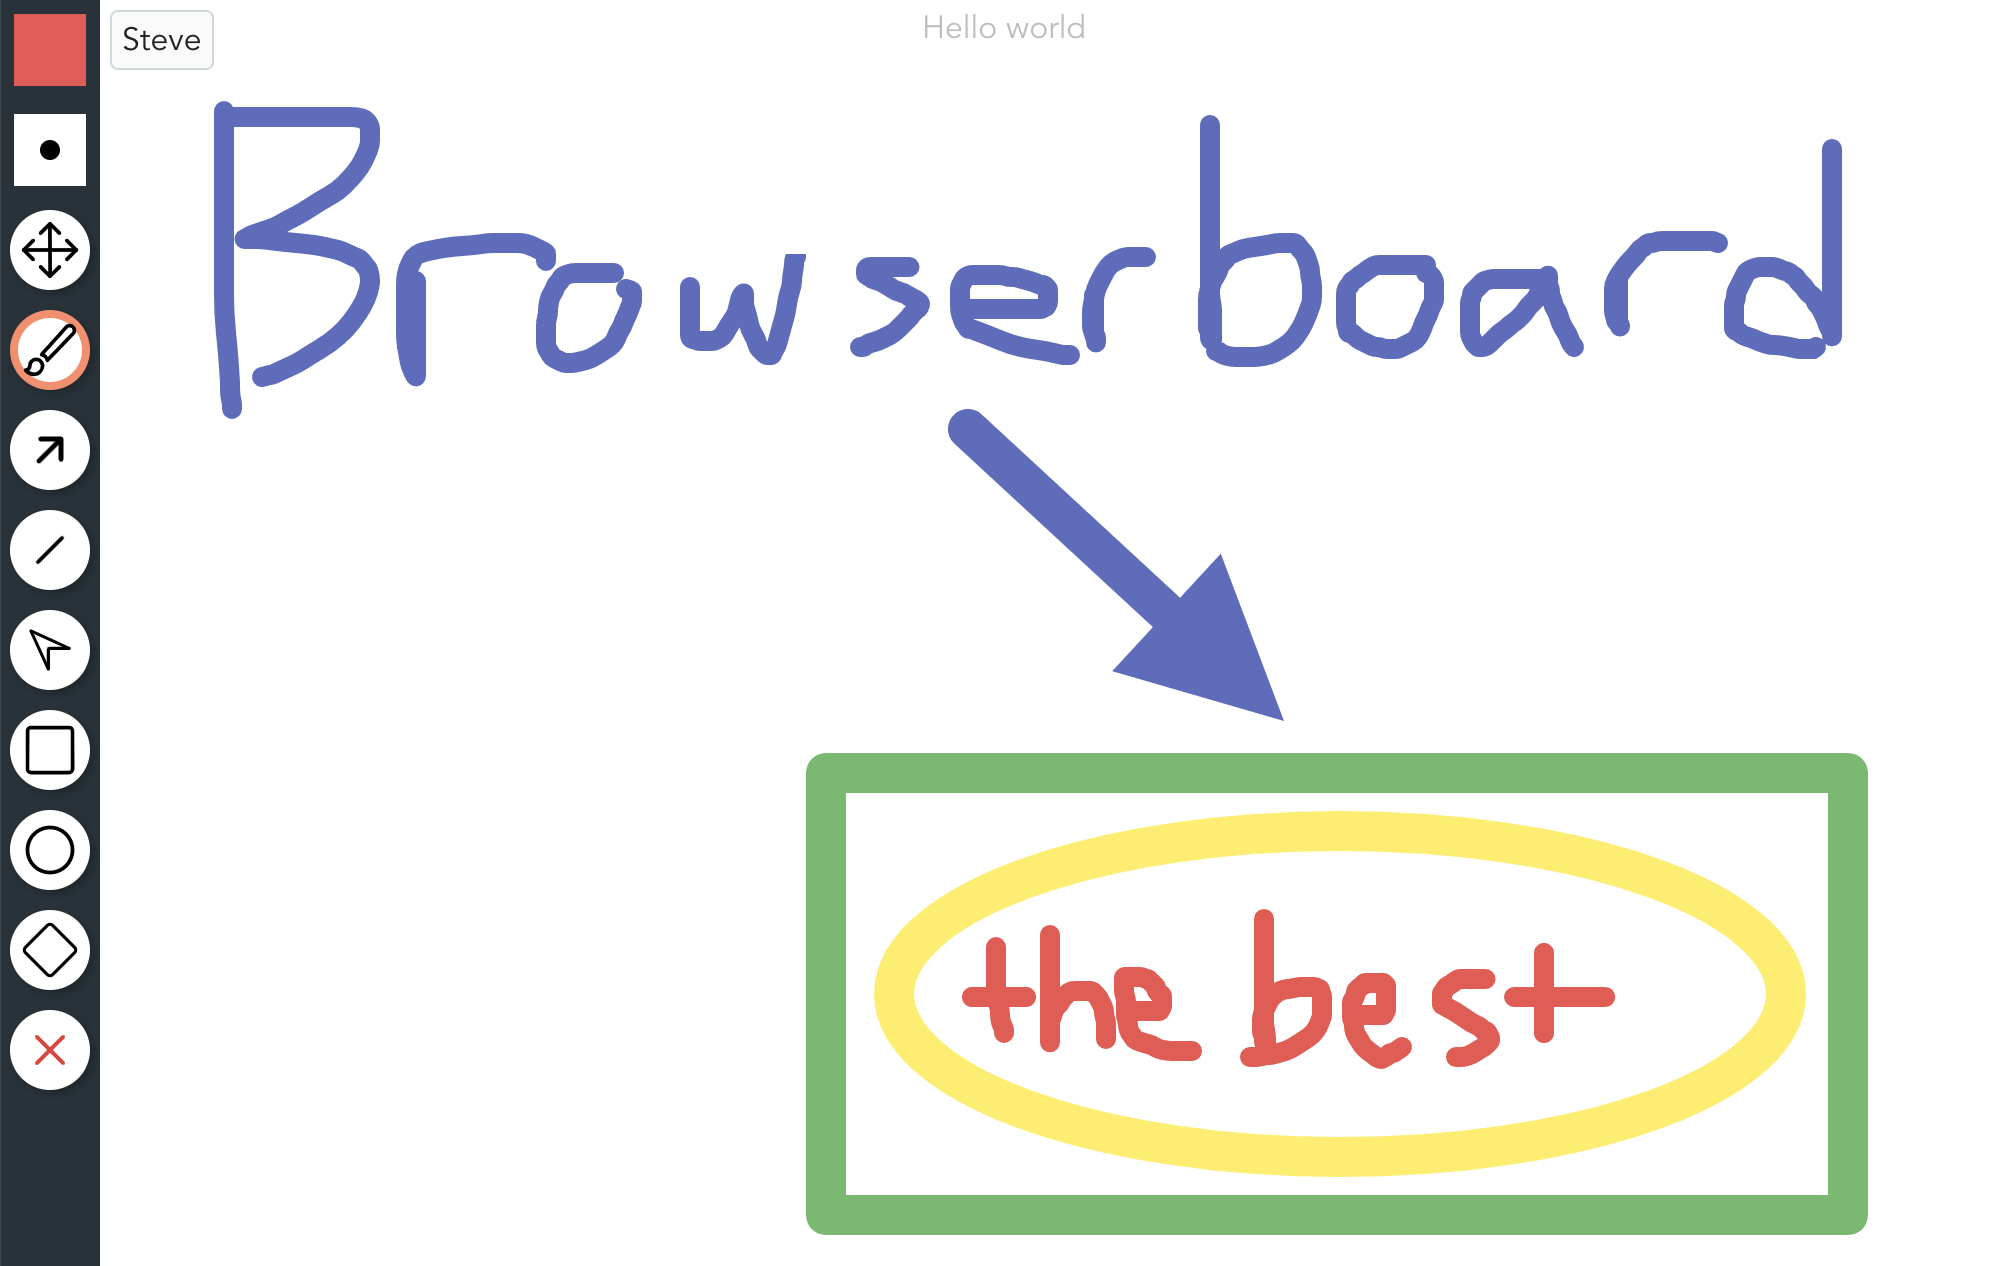 Whiteboard sharing and realtime collaboration tool - Ziteboard